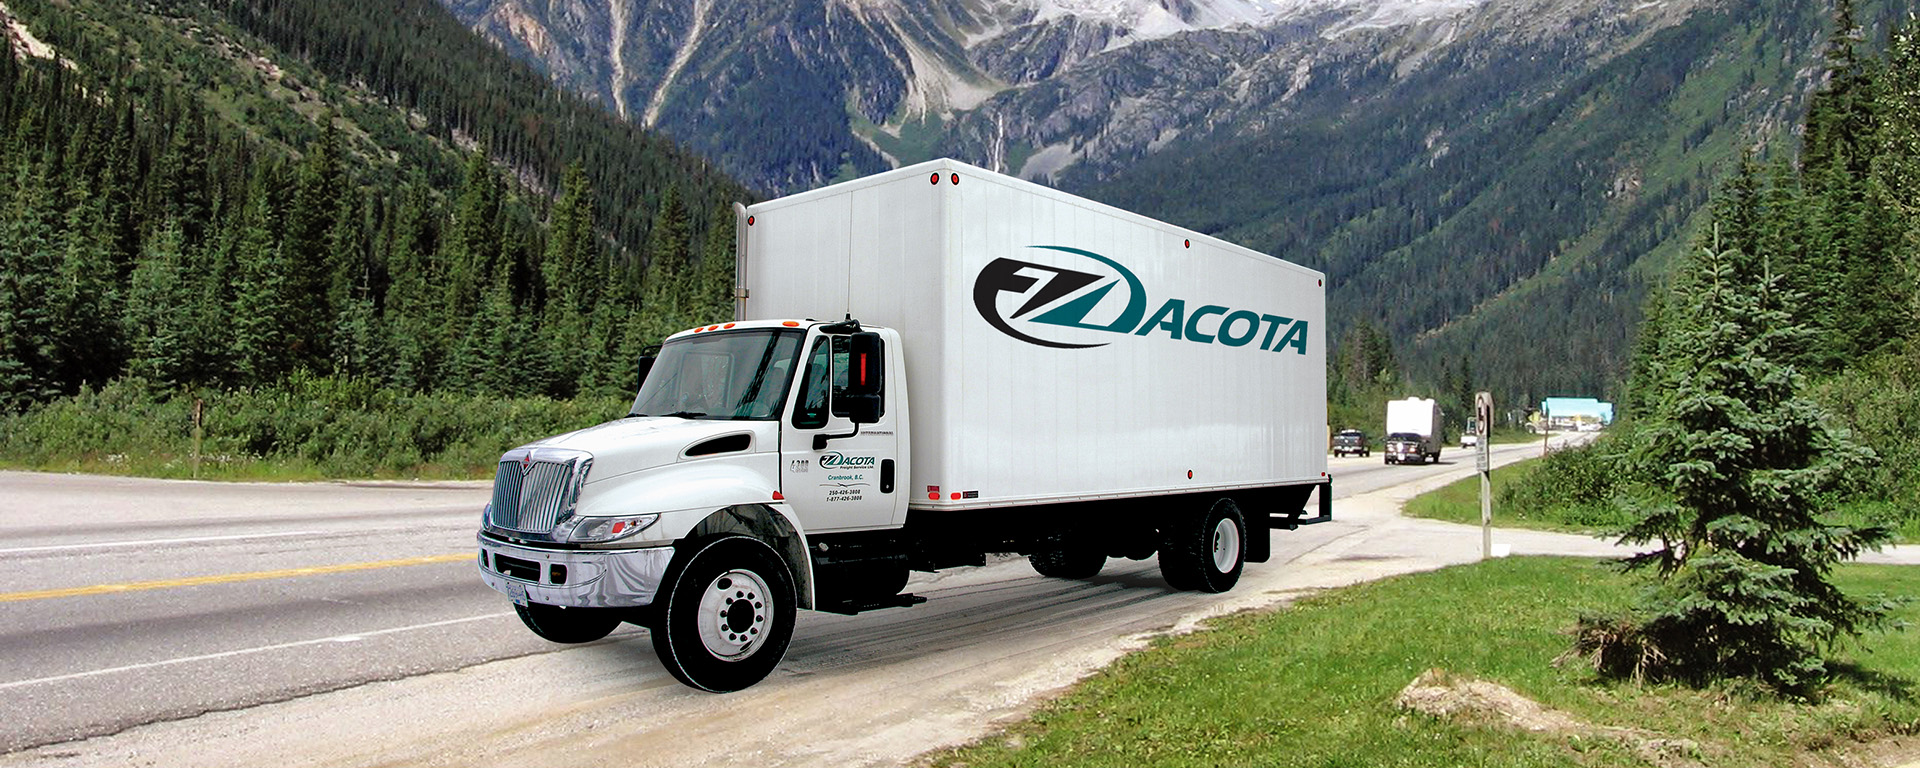 A large Dacota cube van is shown on a scenic road with mountains in the background. 